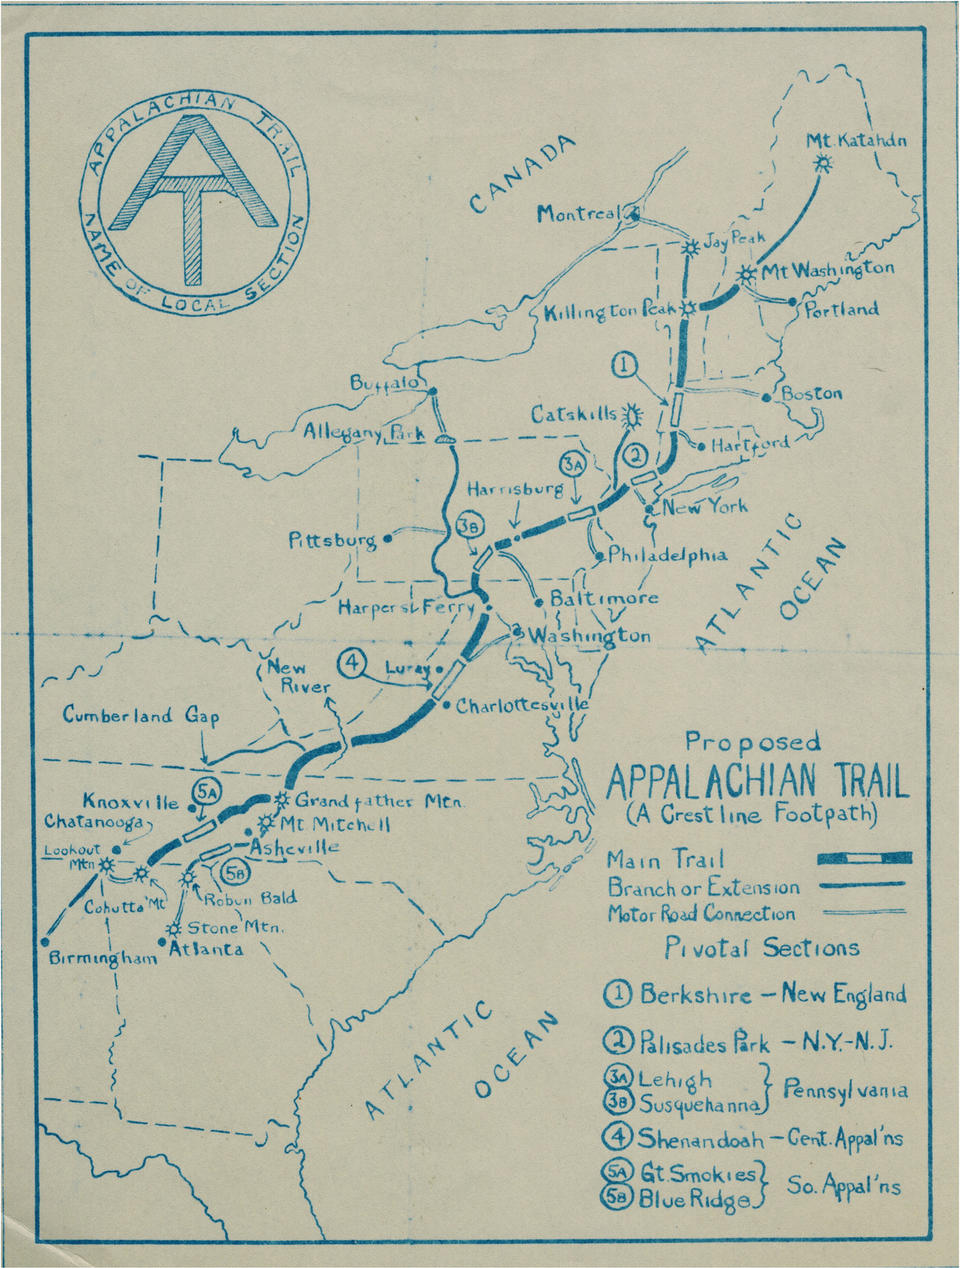 Map of "Proposed Appalachian Trail"